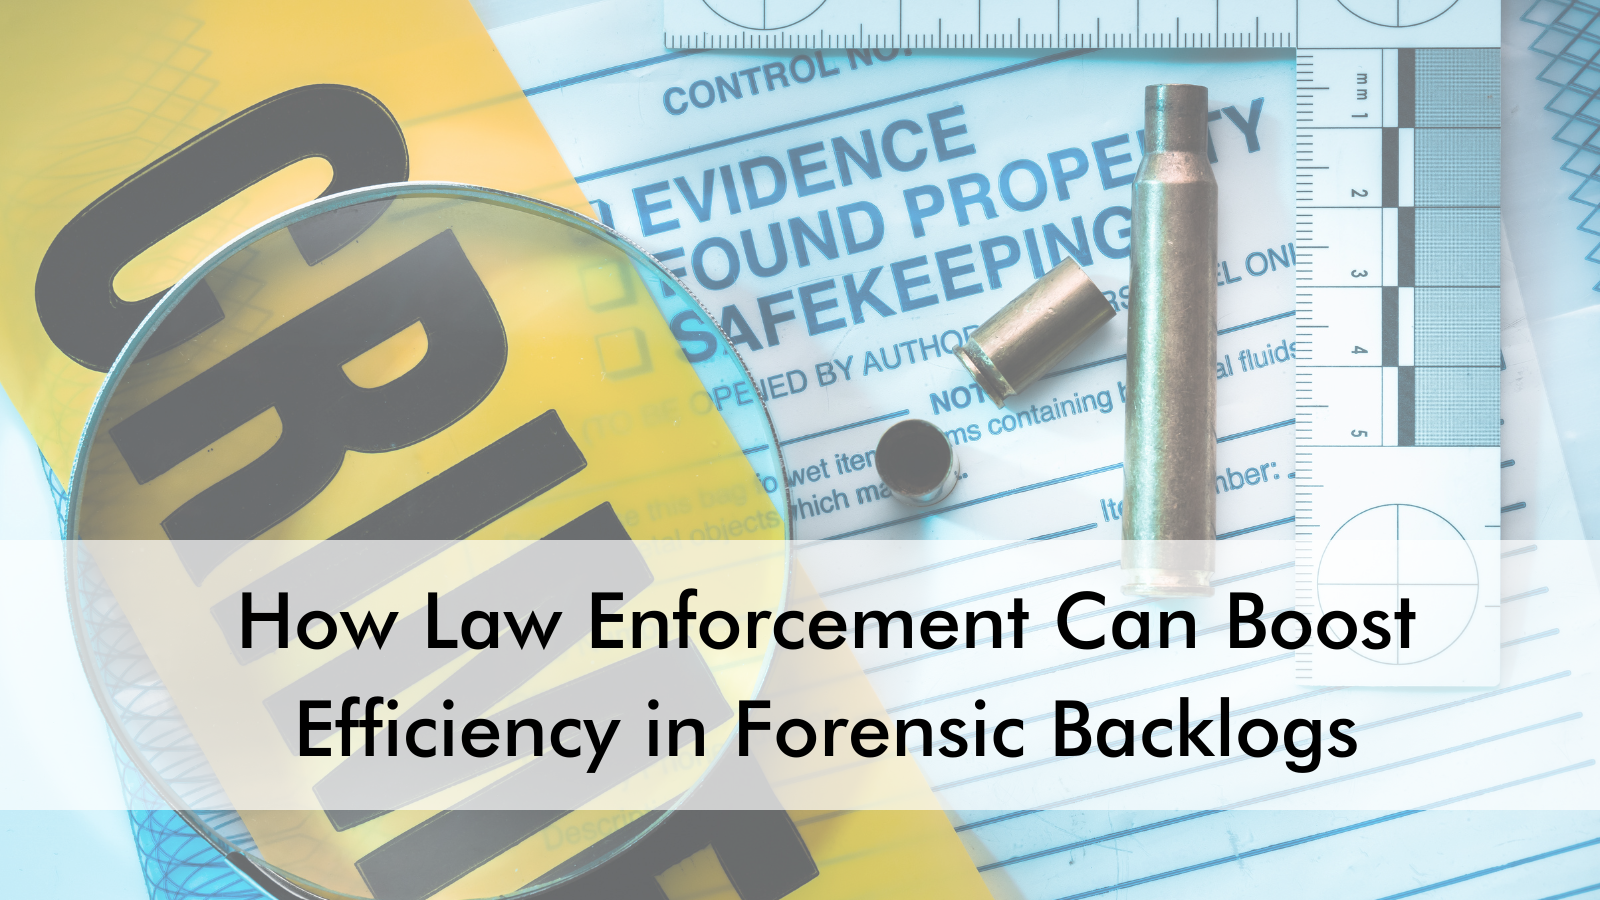 Forensic Backlog: How Law Enforcement Can Reduce Delays and Improve Efficiency